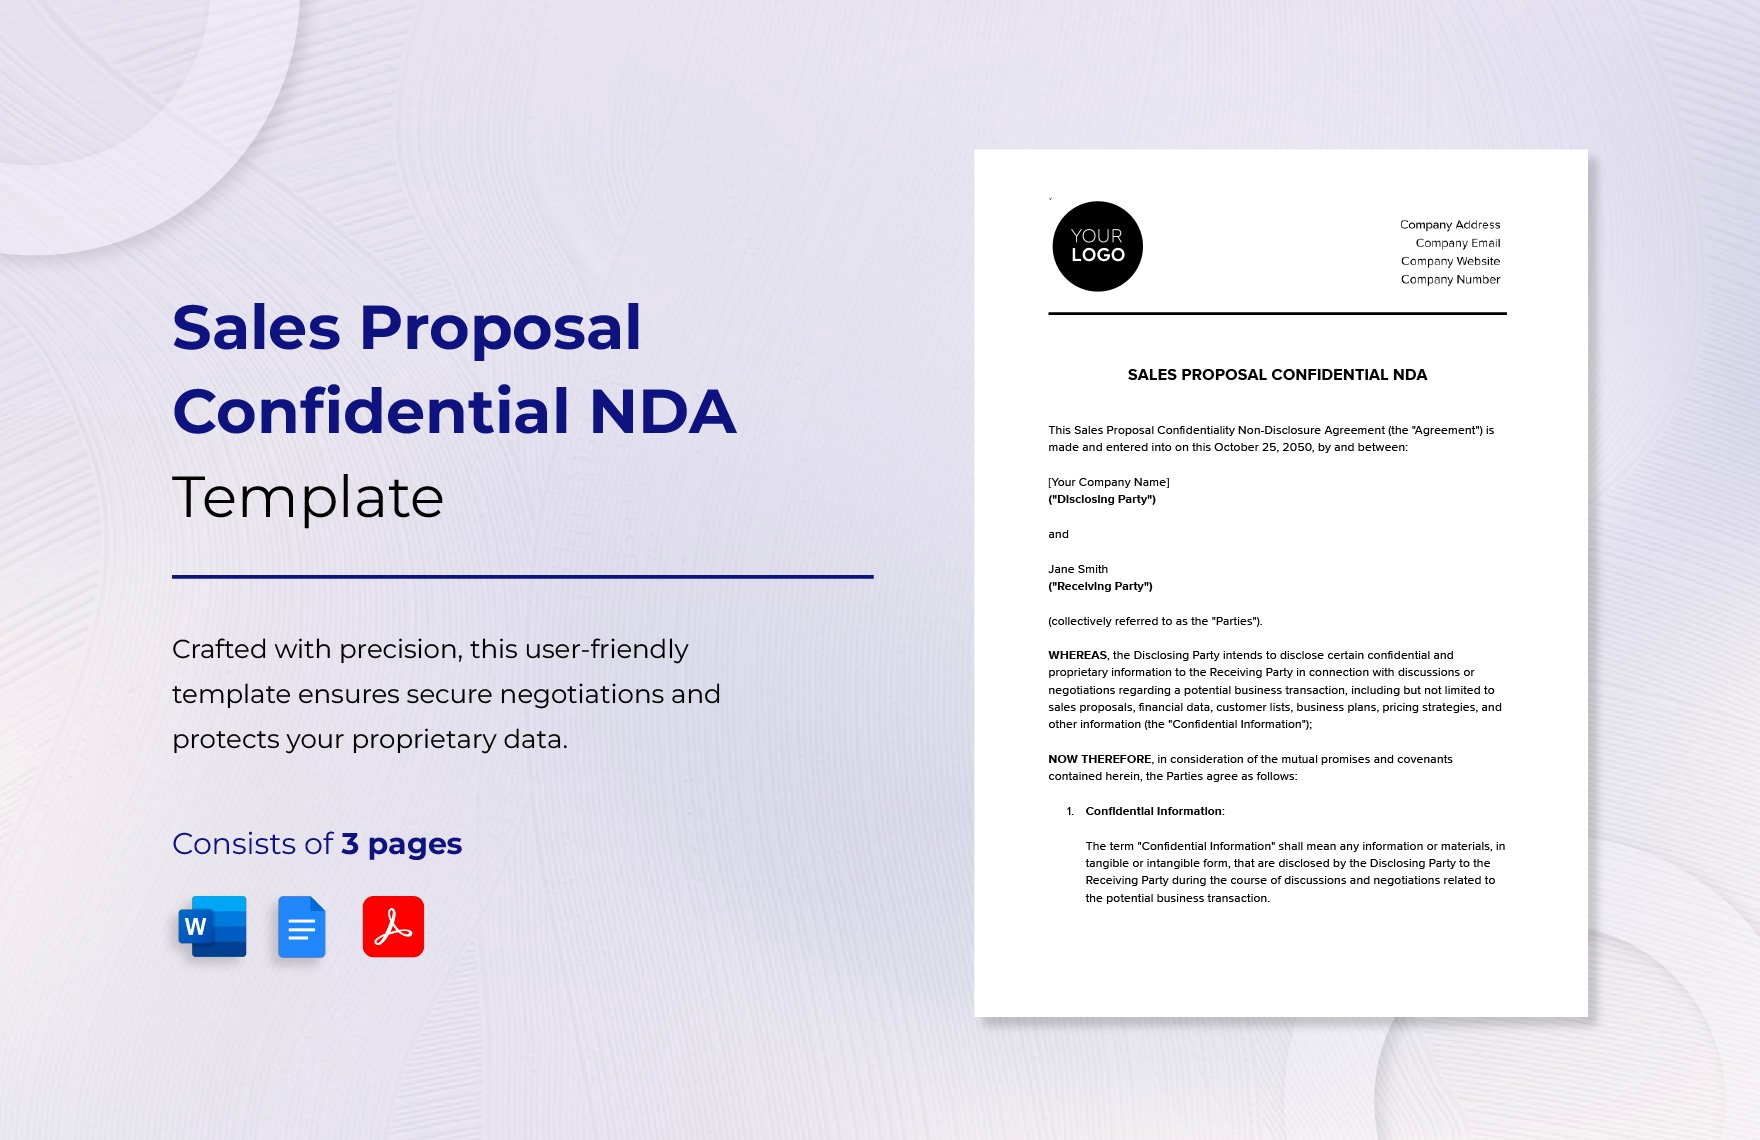 Sales Proposal Confidentiality NDA Template in Word, Google Docs, PDF